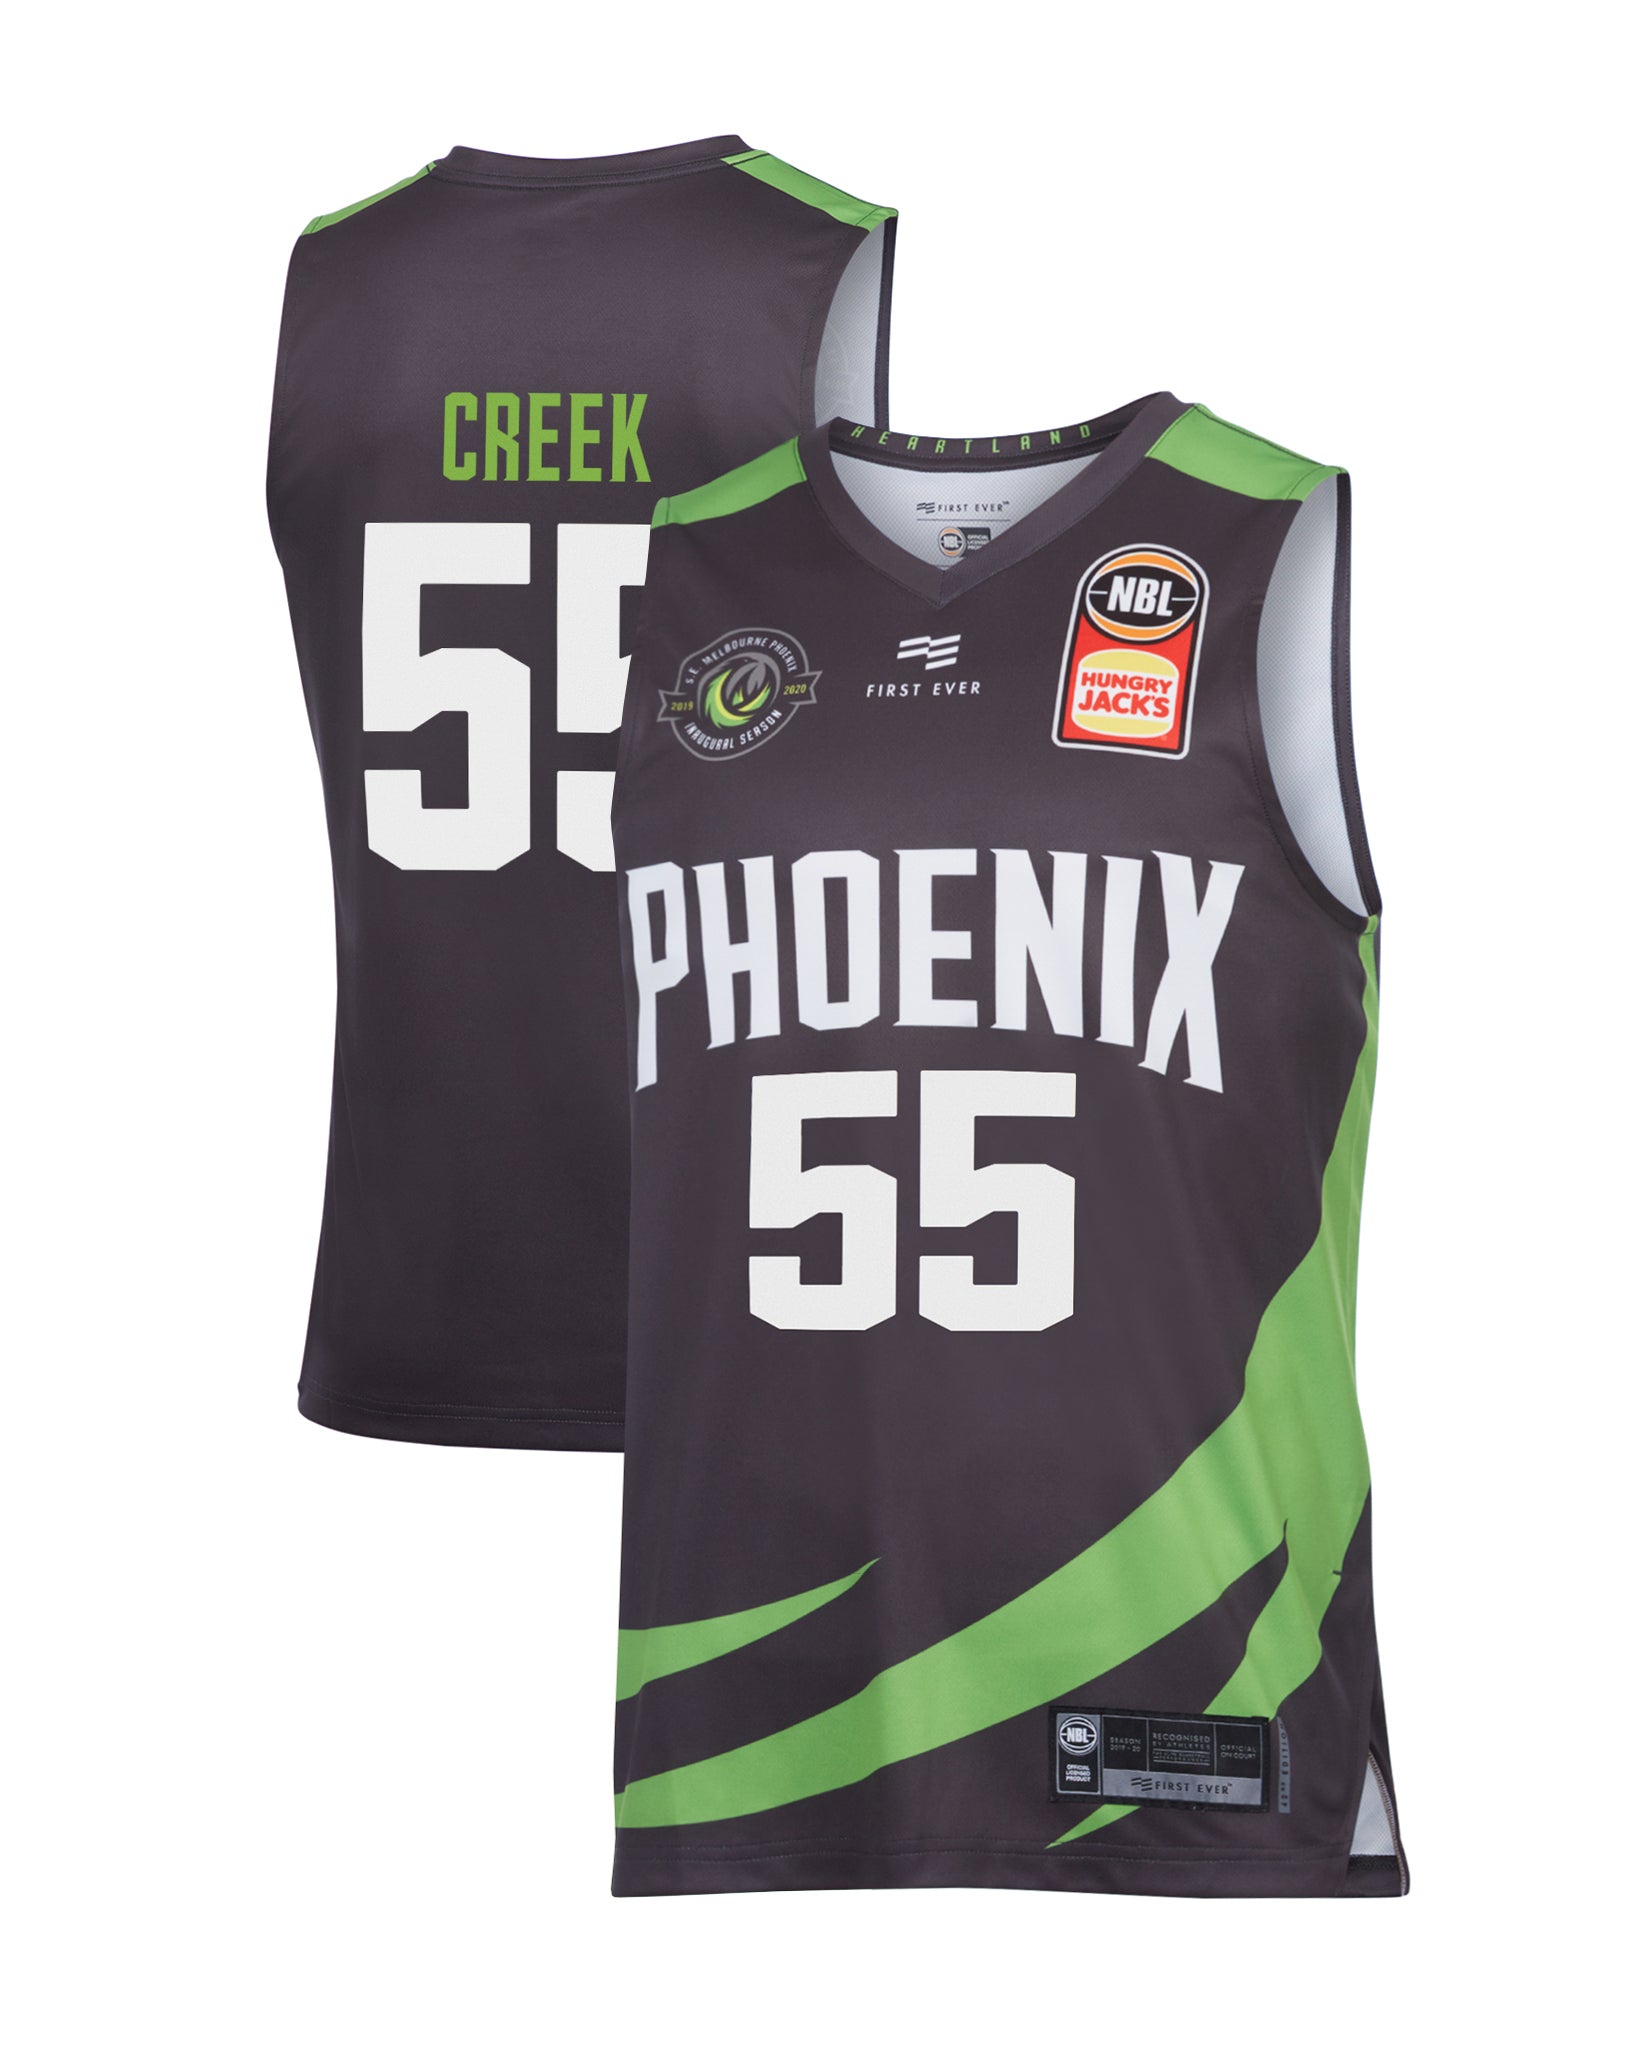 Mitch Creek – Official NBL Store